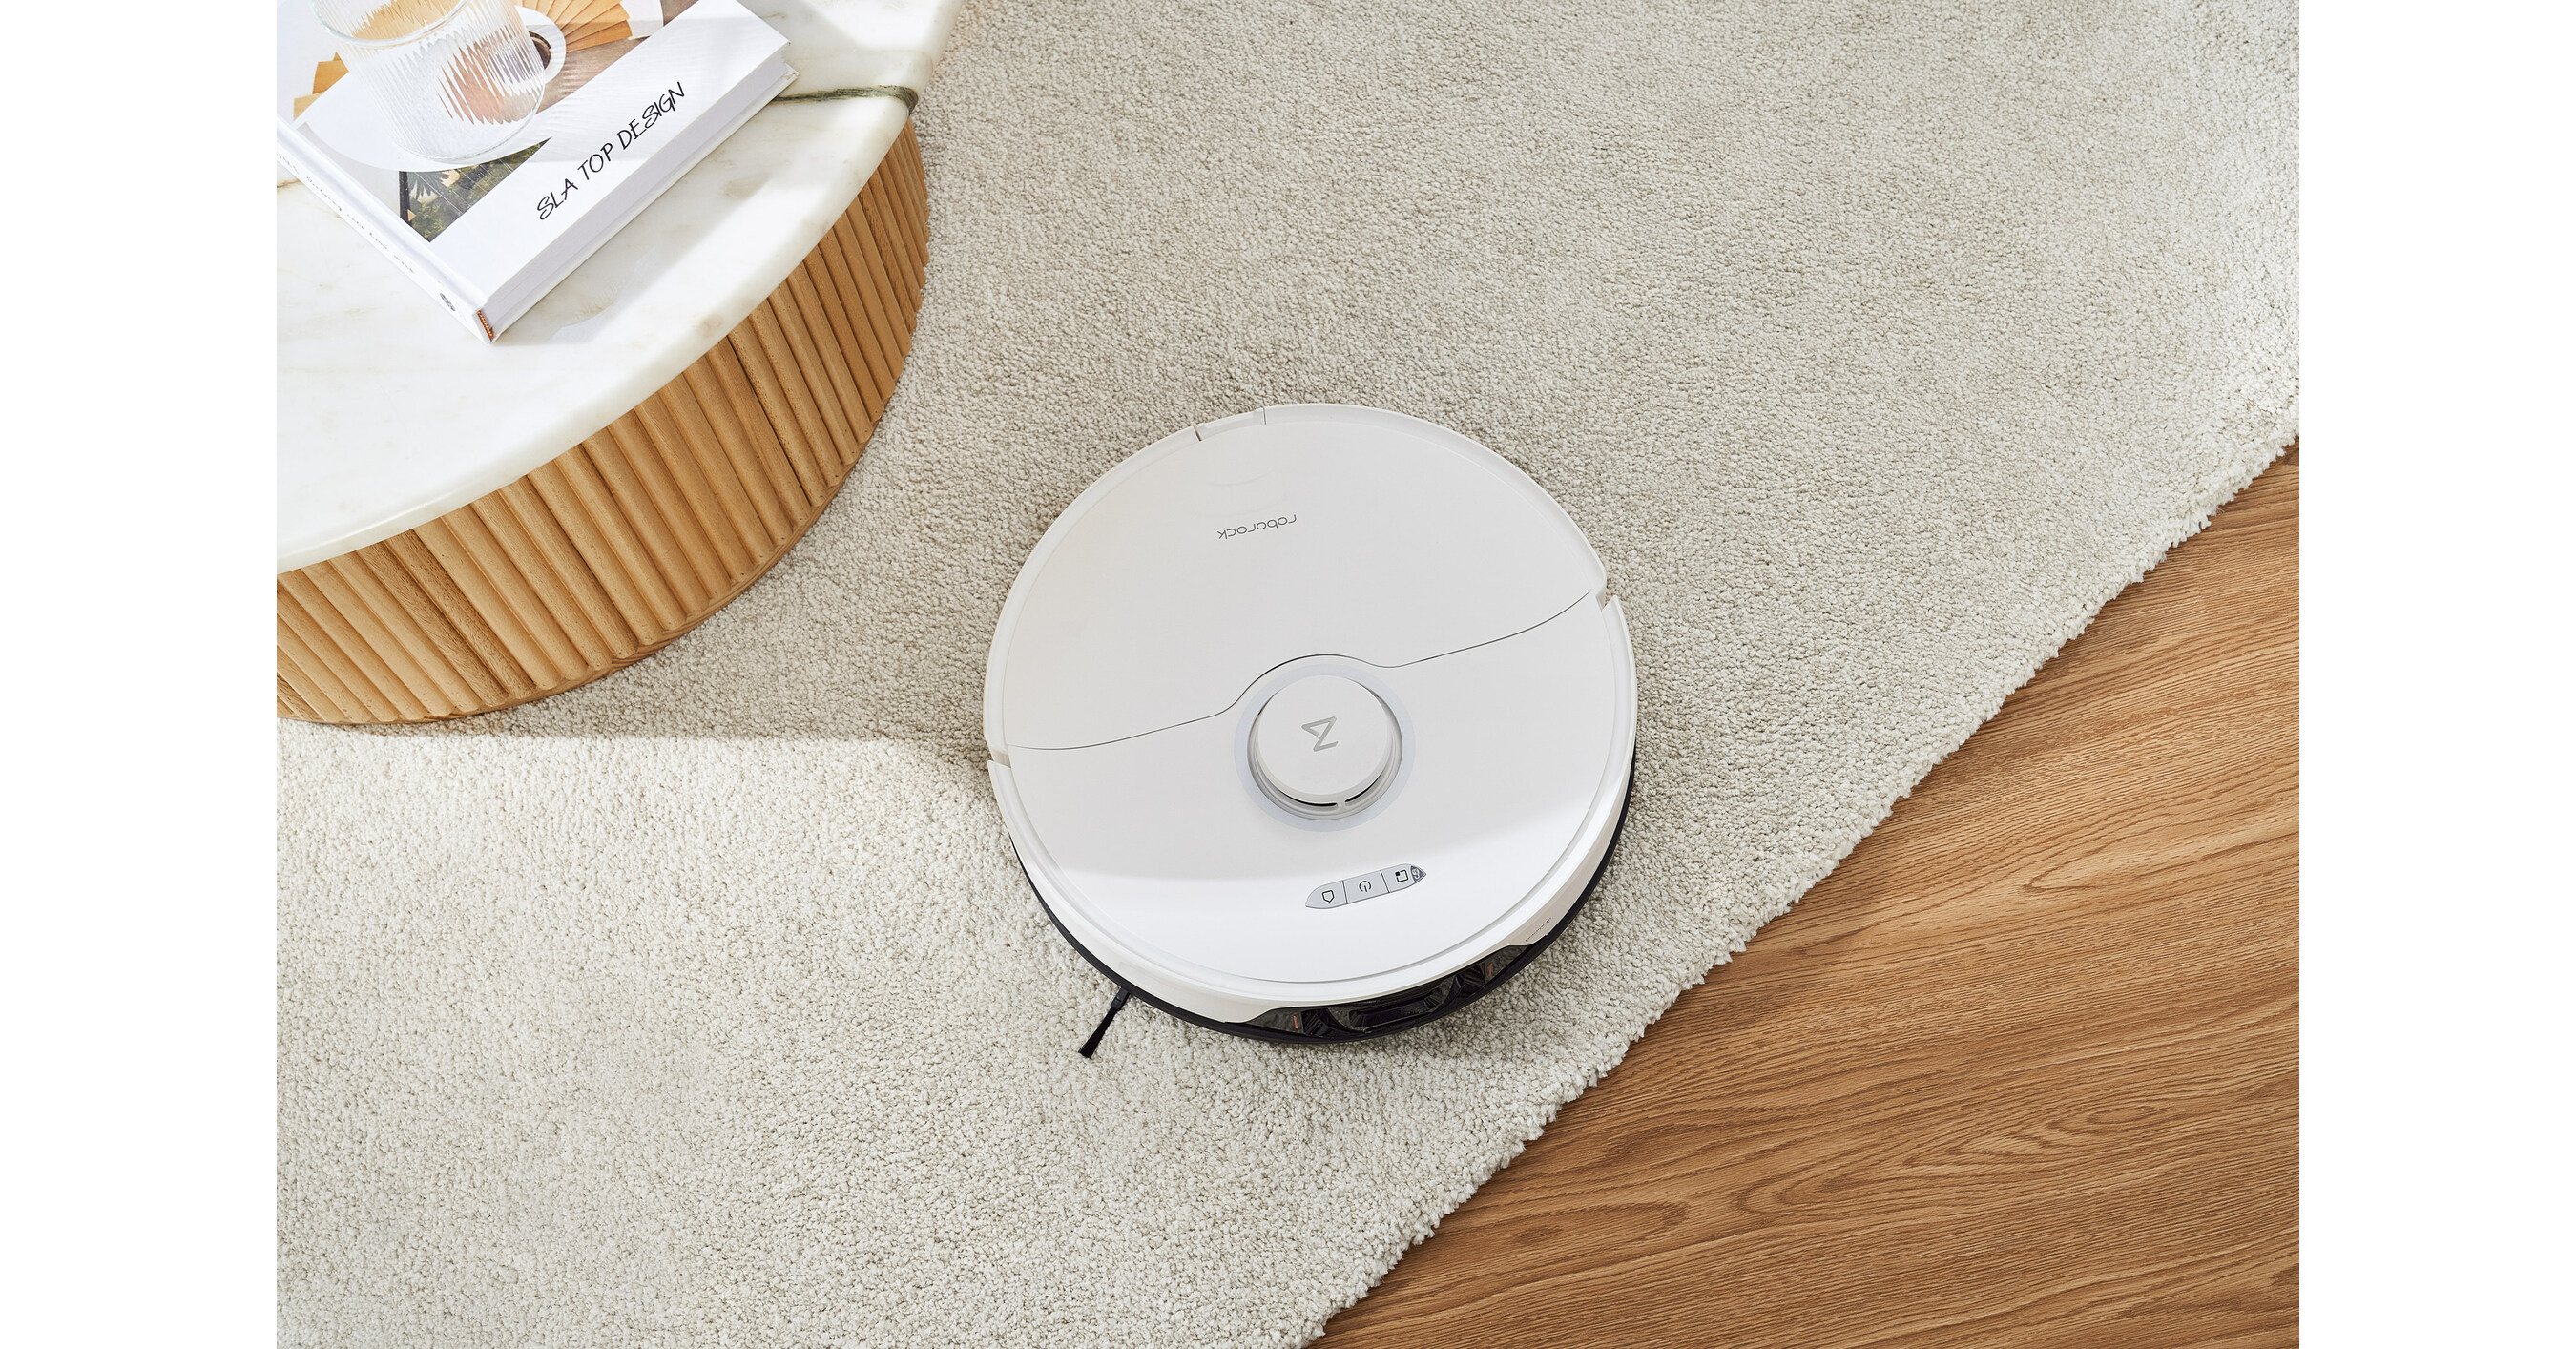 Roborock reveals its new S8 Pro Ultra robot vacuum and cleaning